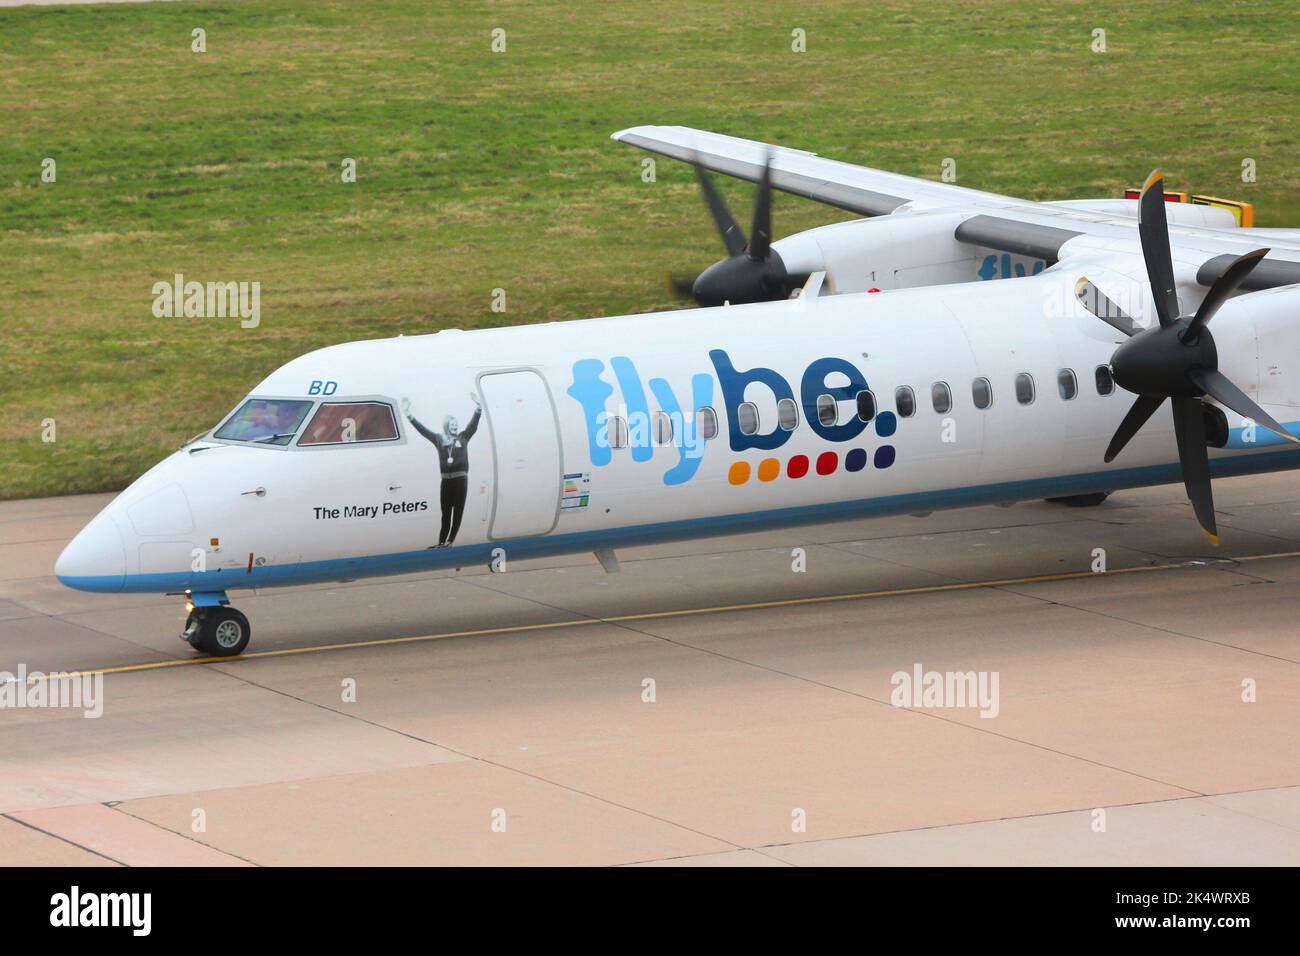 BIRMINGHAM, UK - APRIL 24, 2013: Pilots taxi Flybe Bombardier Dash 8 Q-400 at Birmingham Airport, UK. Flybe carried 7.6 million passengers in 2013. Stock Photo